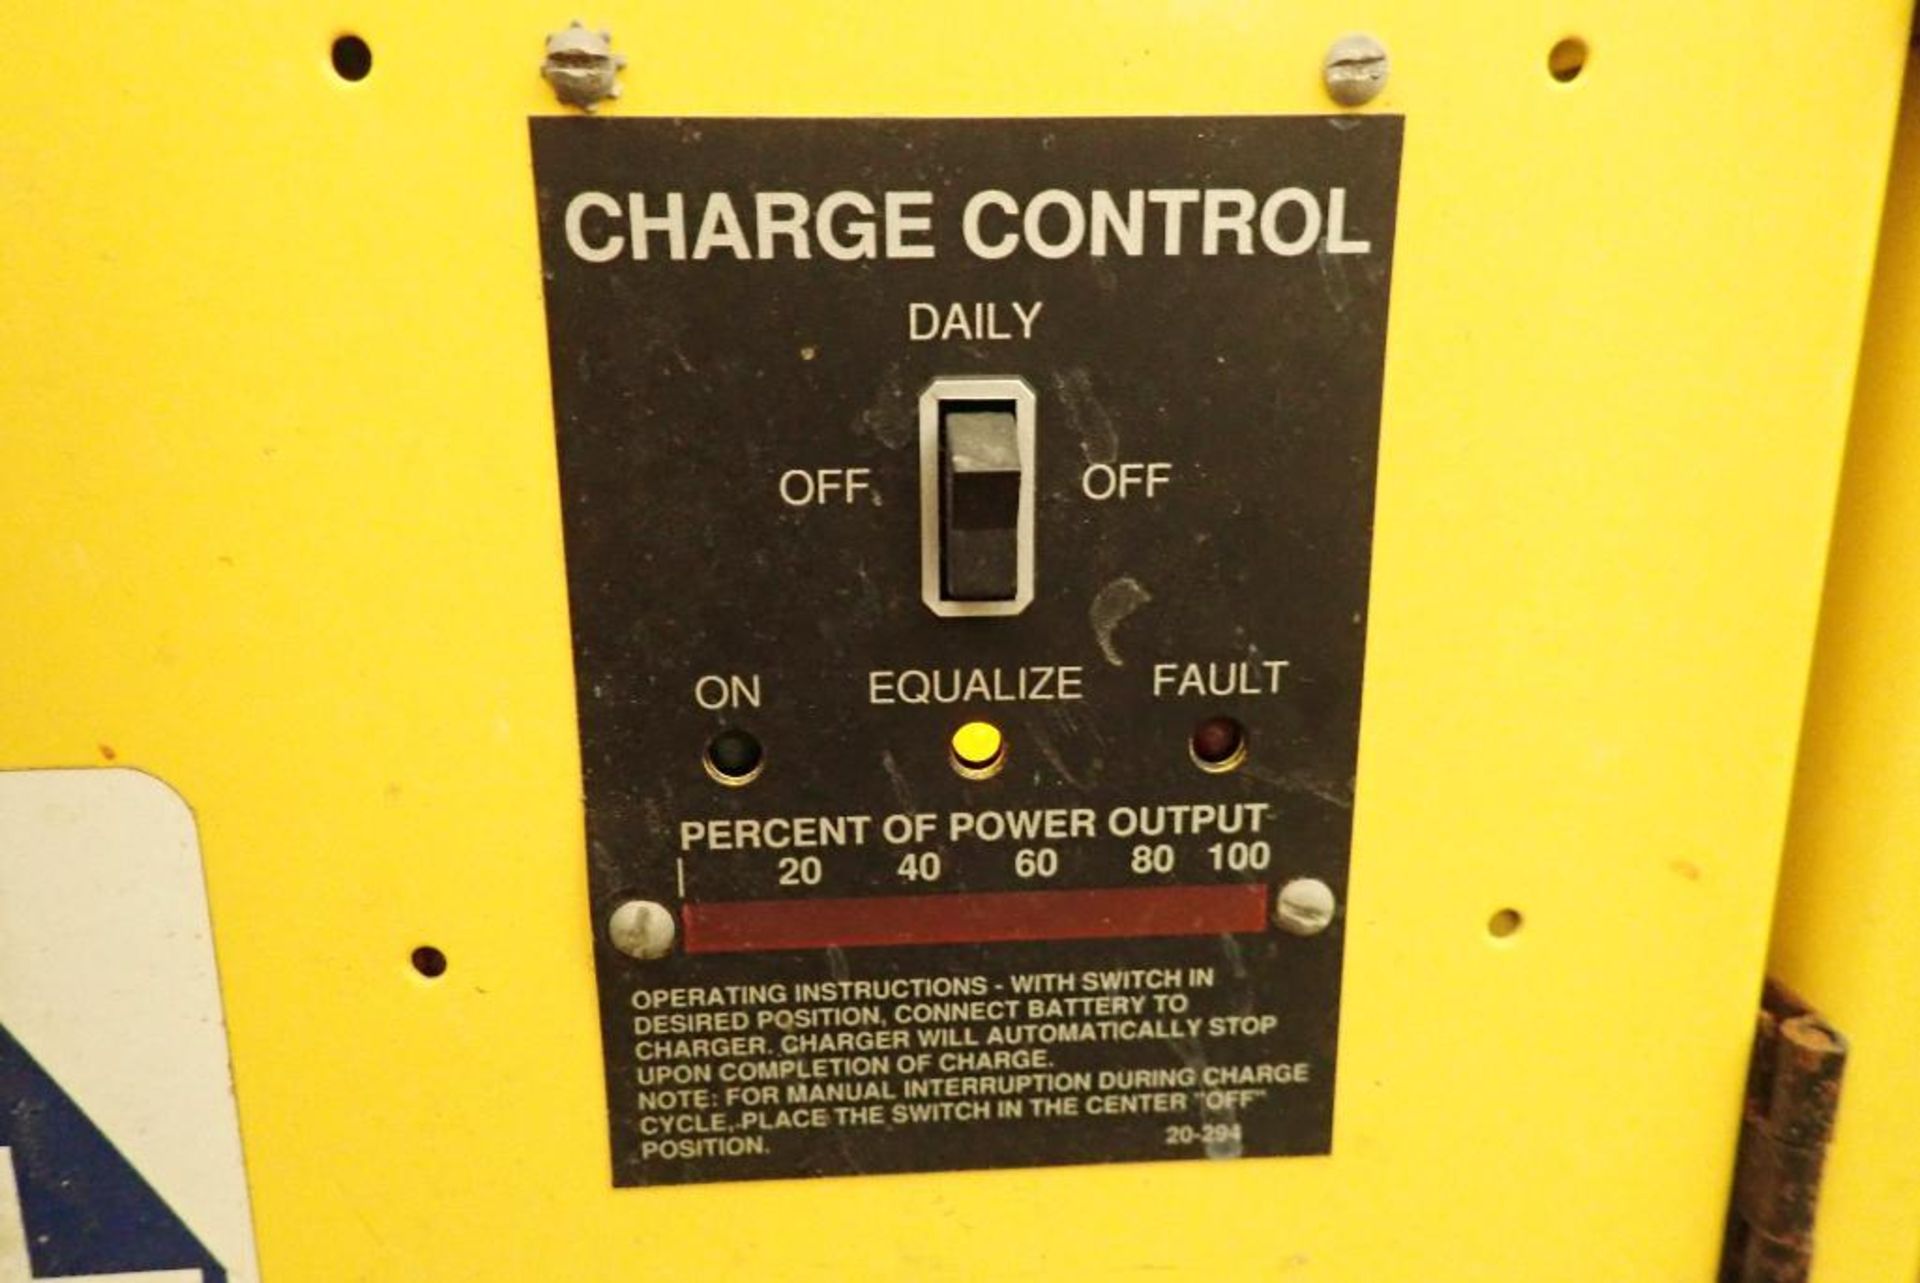 Arrow 24 volt battery charger - Image 5 of 7